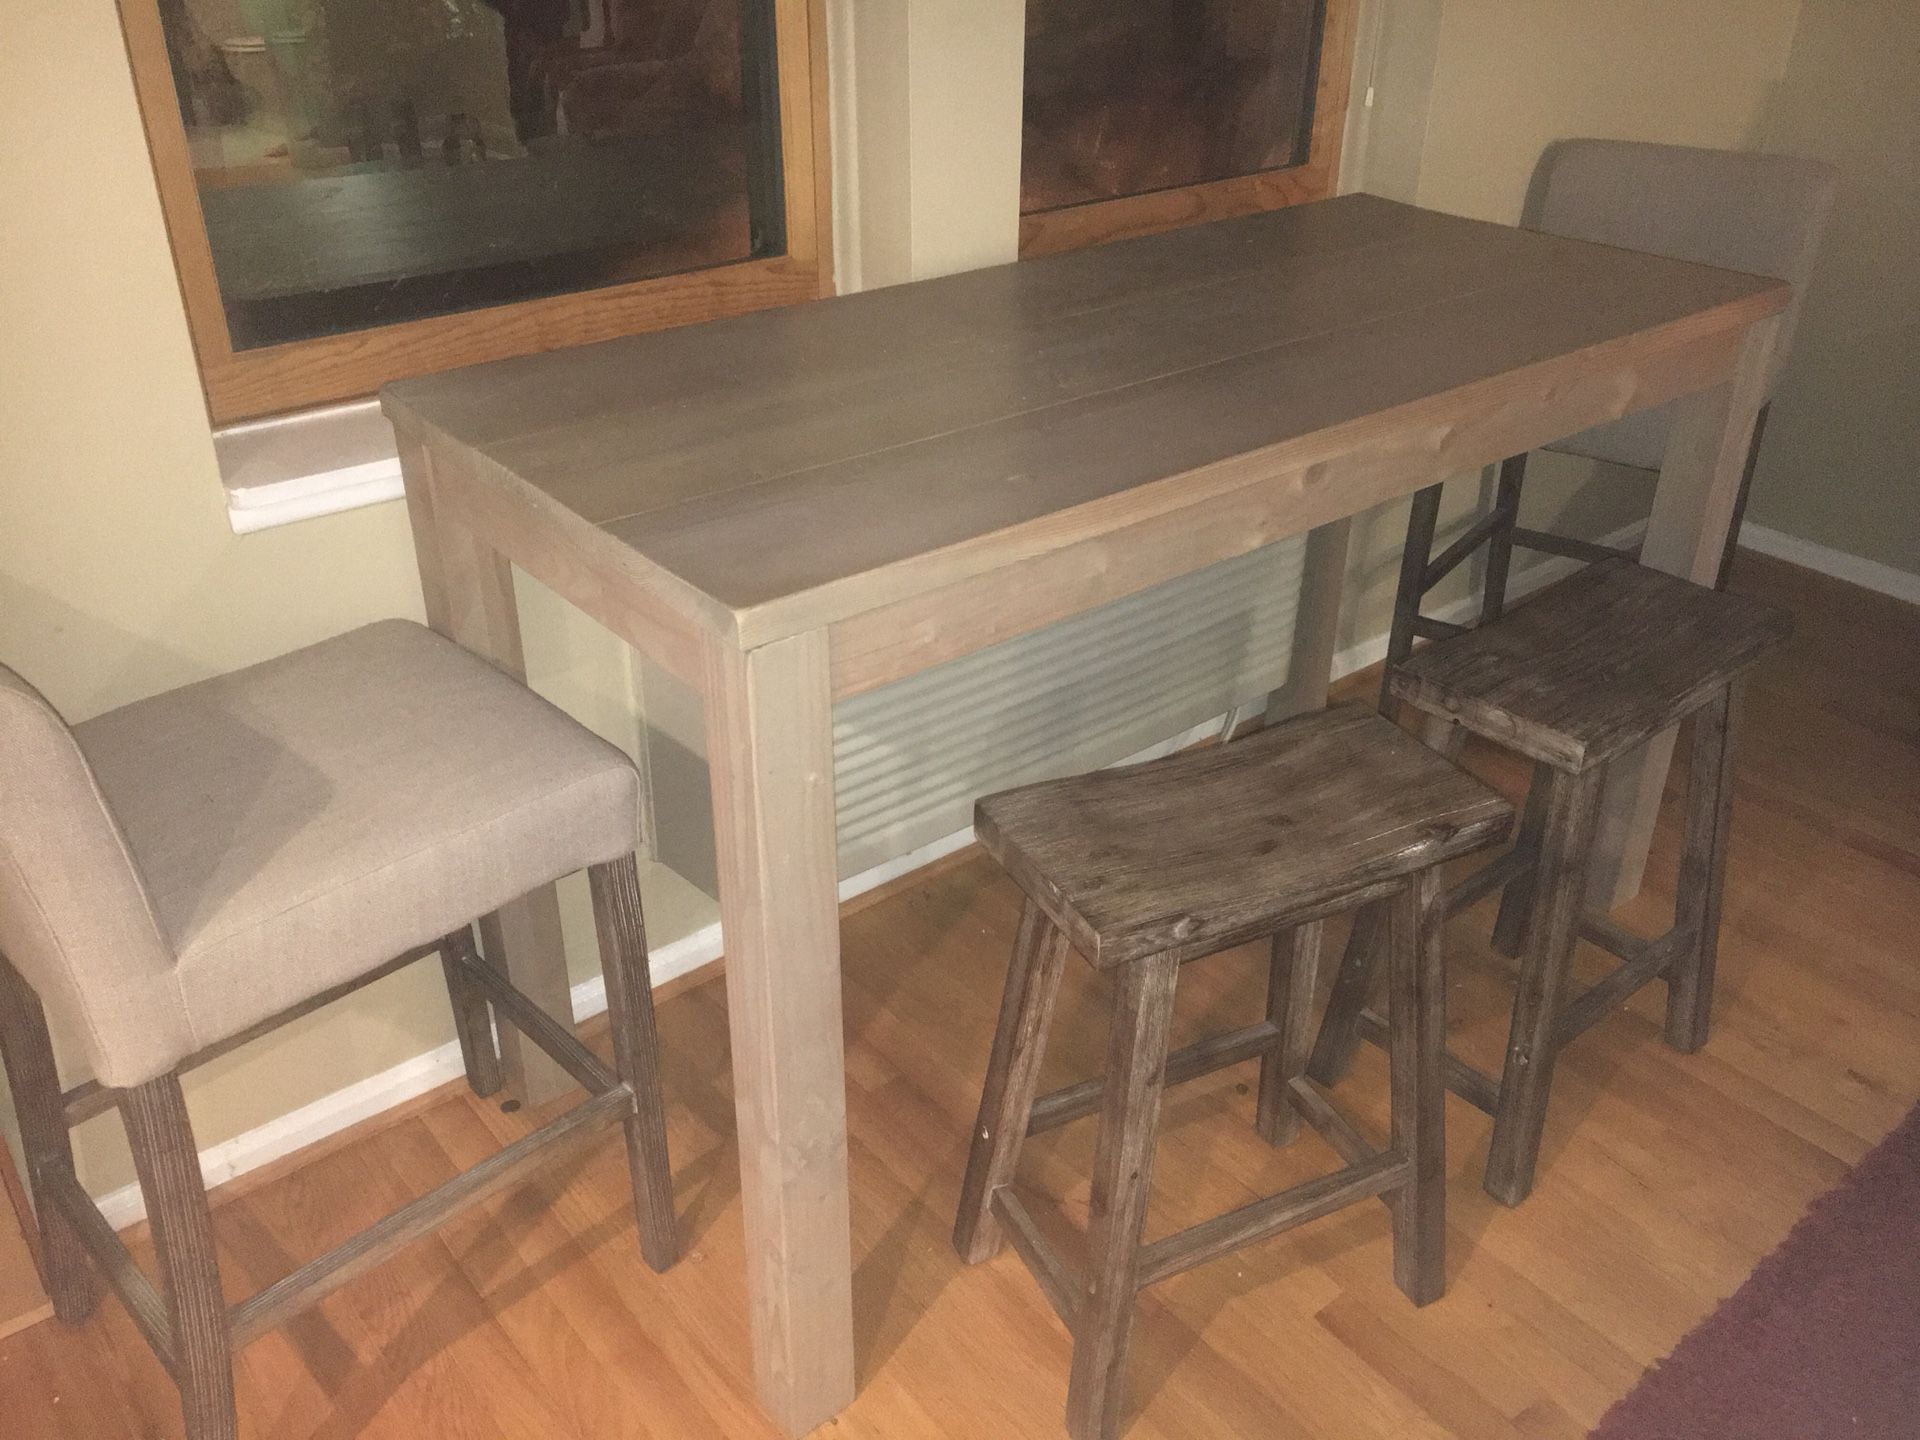 Dining room table and chairs for sale.